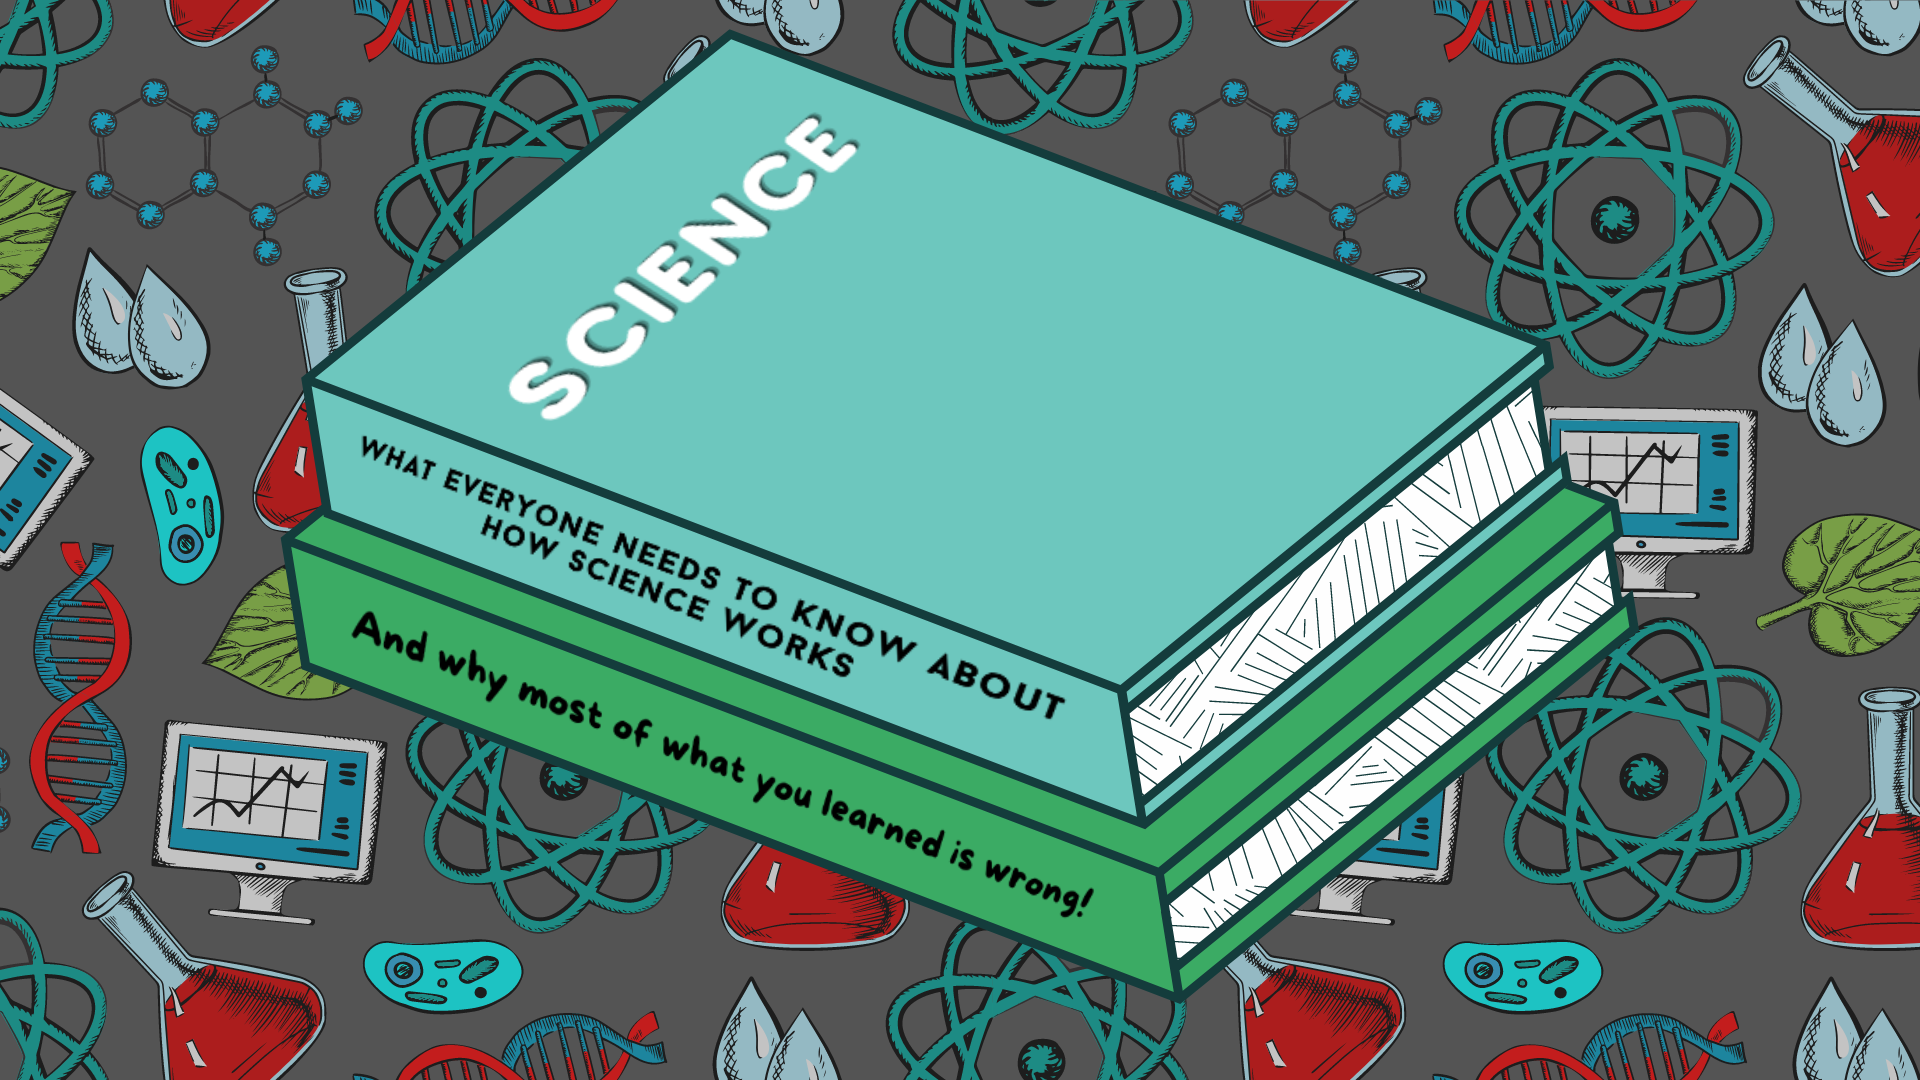 Shown is a science textbook that says what everyone needs to know about how science works and why most of what you learned is wrong.